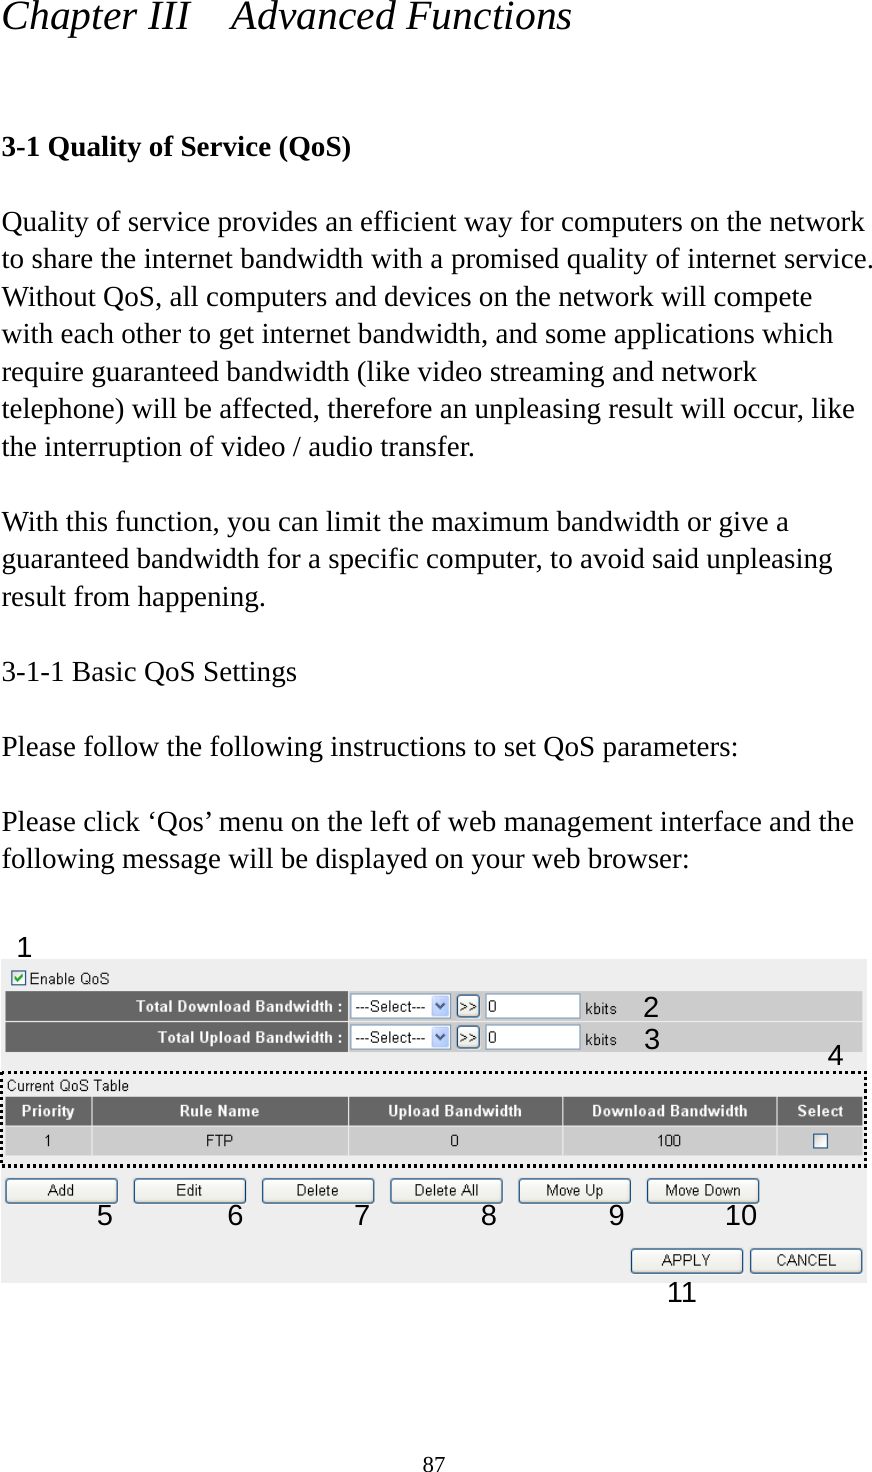 87 Chapter III    Advanced Functions  3-1 Quality of Service (QoS)  Quality of service provides an efficient way for computers on the network to share the internet bandwidth with a promised quality of internet service. Without QoS, all computers and devices on the network will compete with each other to get internet bandwidth, and some applications which require guaranteed bandwidth (like video streaming and network telephone) will be affected, therefore an unpleasing result will occur, like the interruption of video / audio transfer.    With this function, you can limit the maximum bandwidth or give a guaranteed bandwidth for a specific computer, to avoid said unpleasing result from happening.  3-1-1 Basic QoS Settings  Please follow the following instructions to set QoS parameters:  Please click ‘Qos’ menu on the left of web management interface and the following message will be displayed on your web browser:       1 2 34 5 6 7 8 9 10 11 